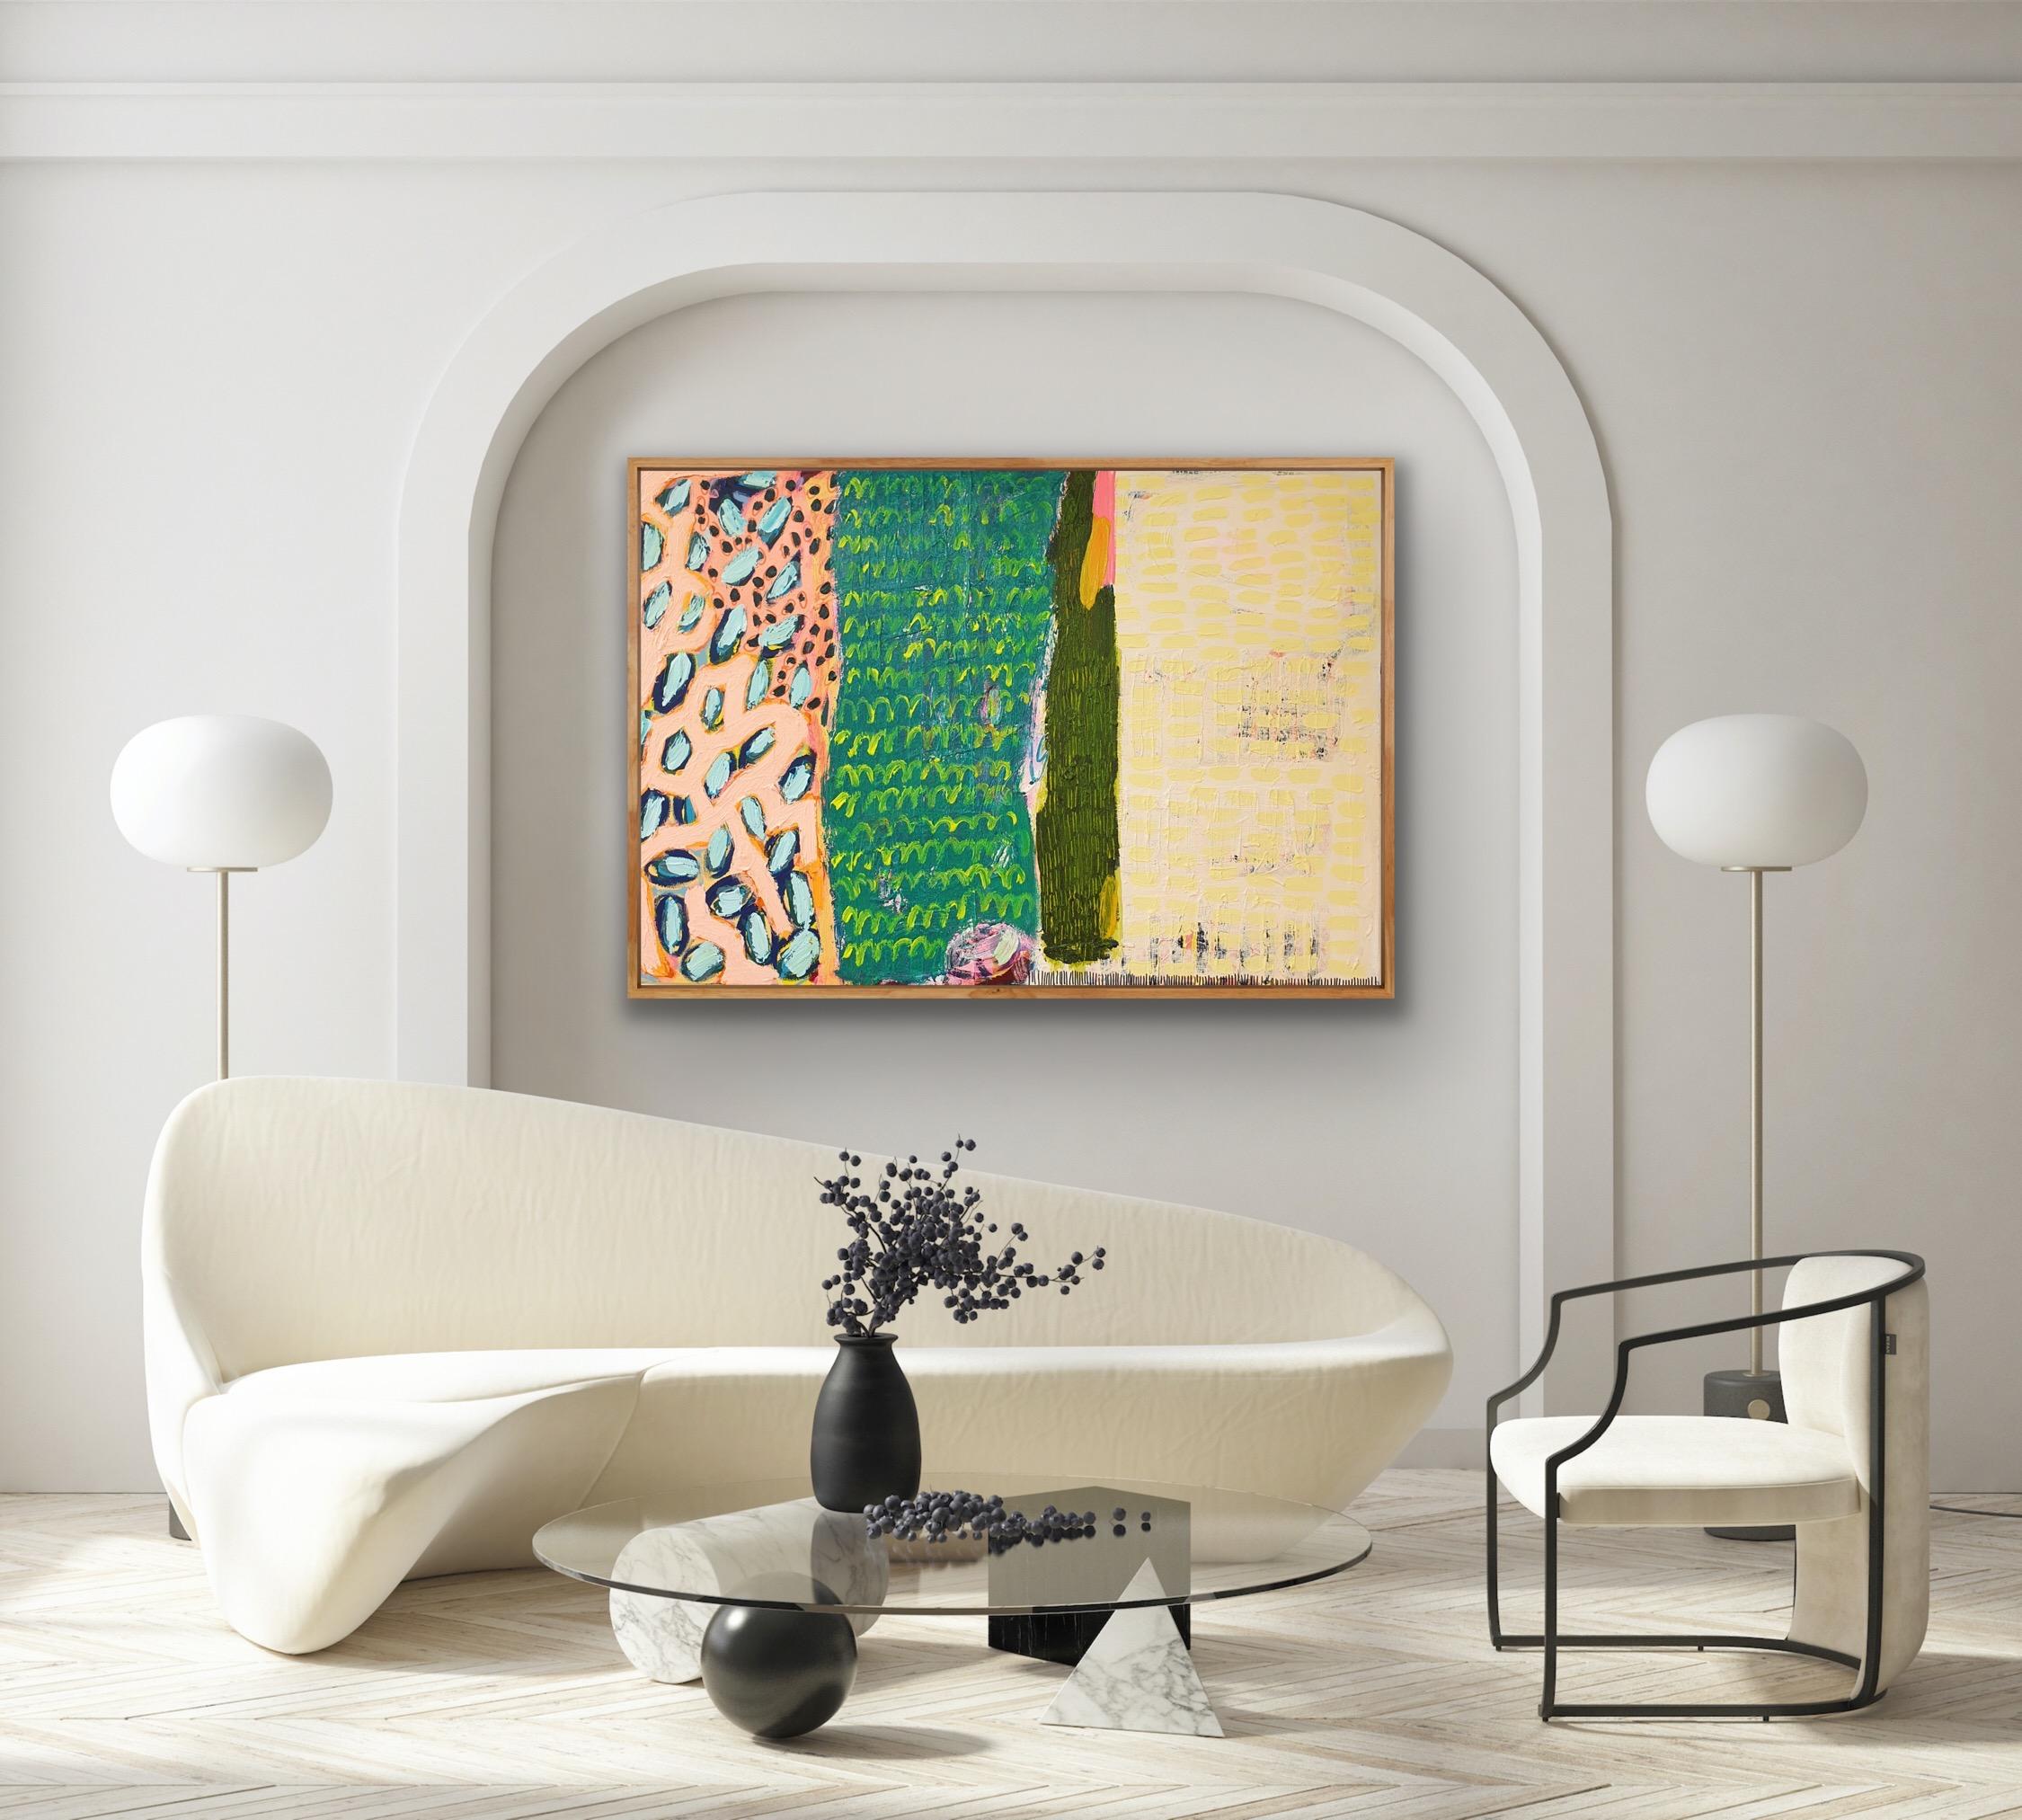 Original abstract painting exploring the language of paint and colour.

Additional information:
#580
Jessie Woodward
Original abstract painting
Acrylic painting
Sold Unframed
70 H x 100 W x 5 D cm (27.56 x 39.37 x 1.97 in)

Image size: 
Height: 70cm